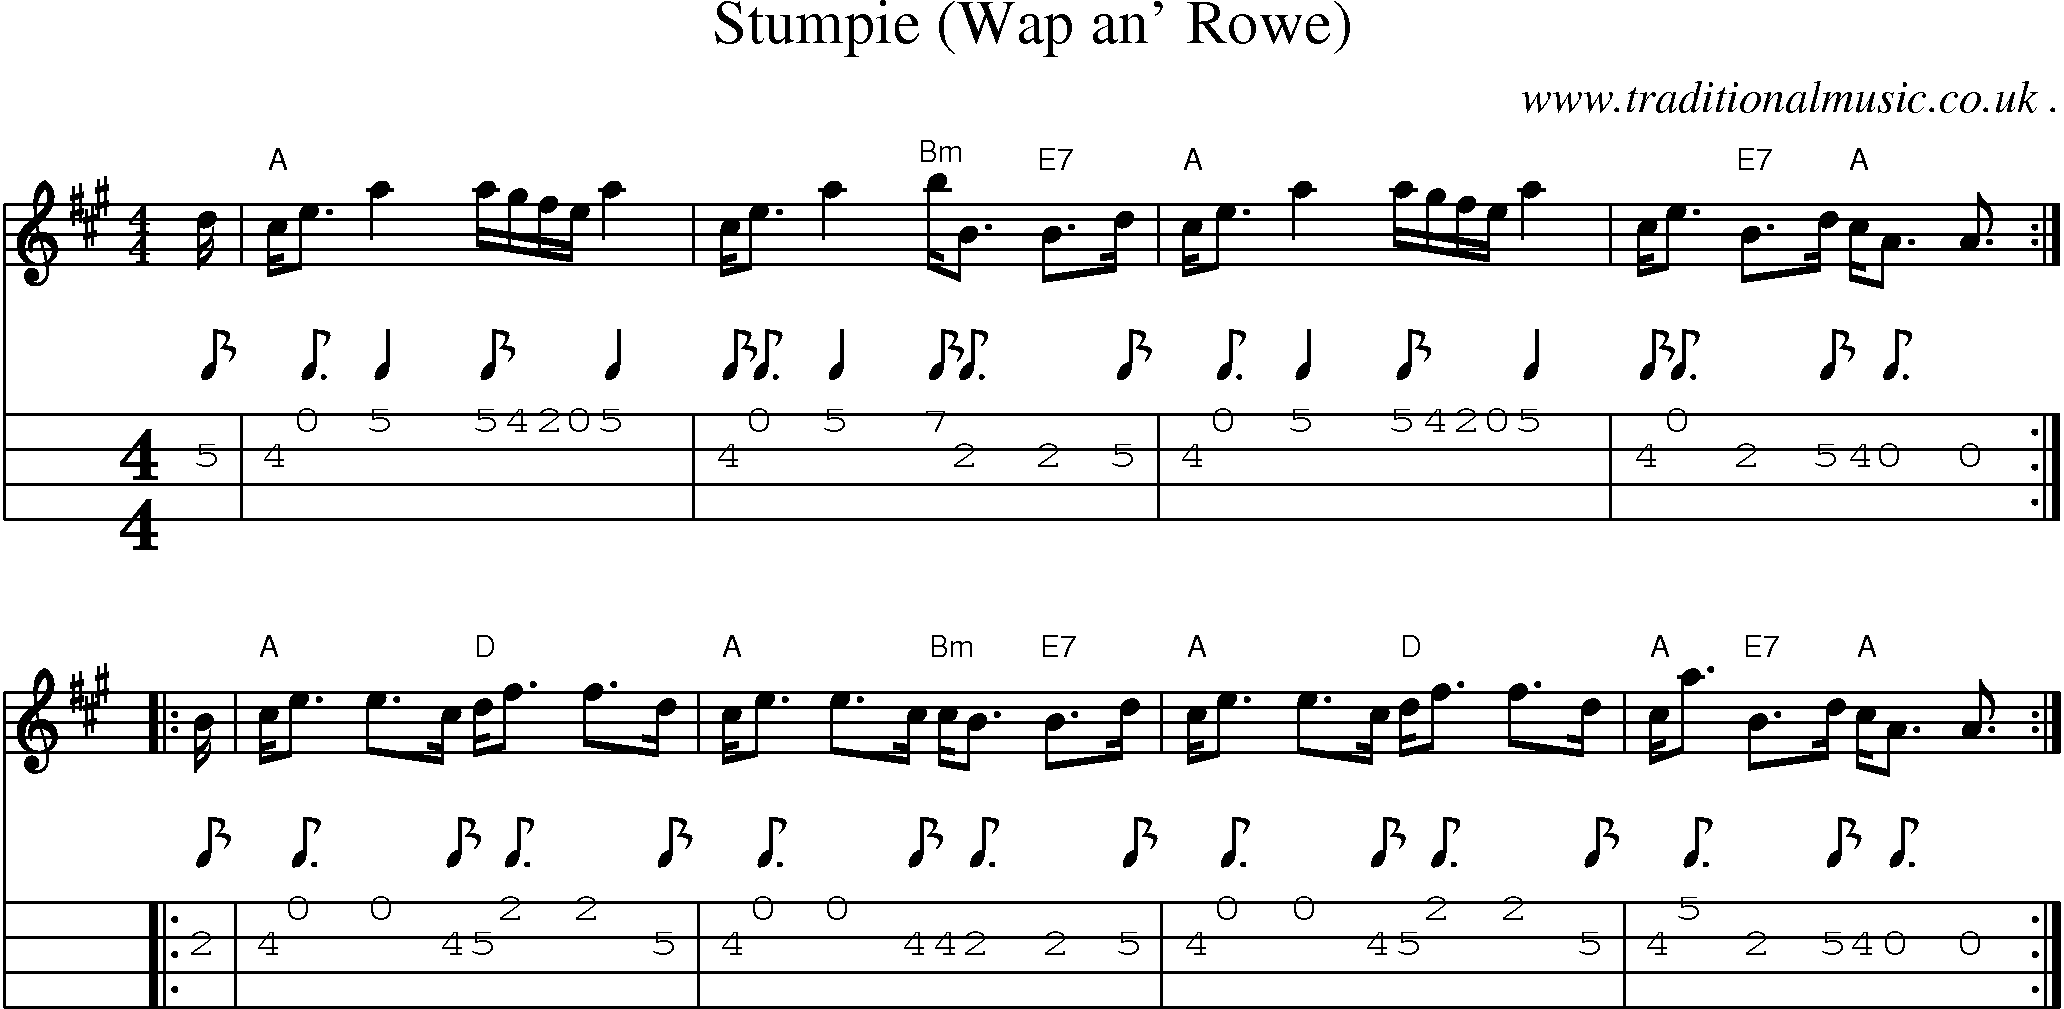 Sheet-music  score, Chords and Mandolin Tabs for Stumpie Wap An Rowe